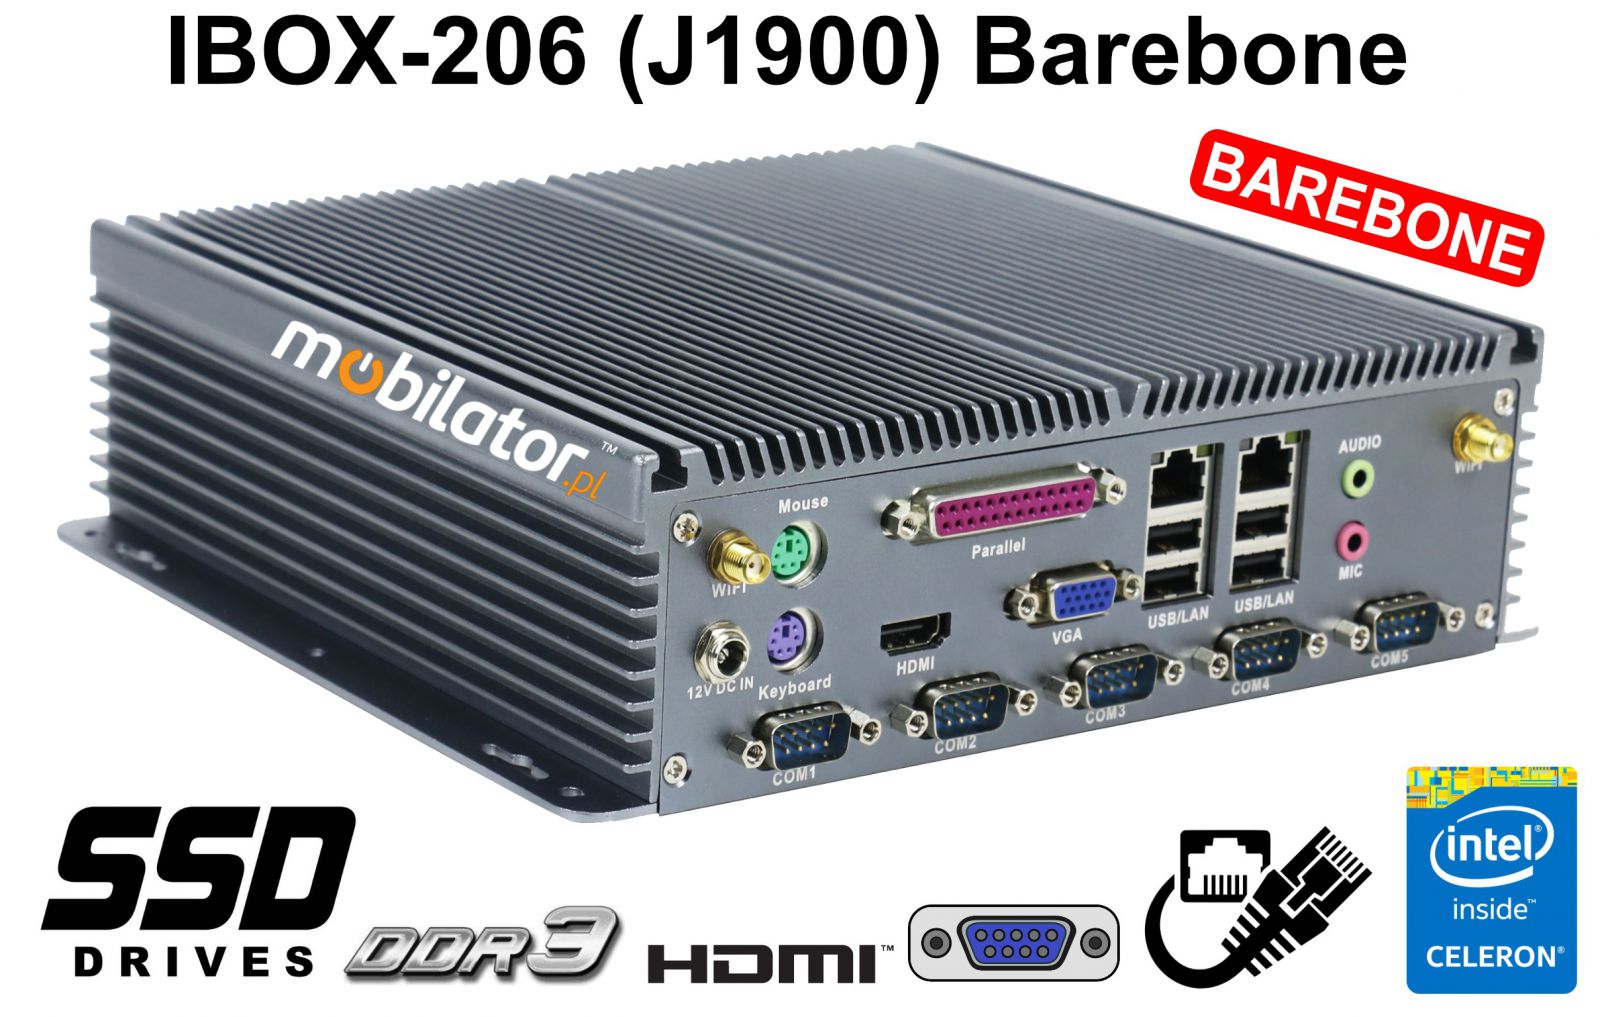 IBOX-206 Industrial computer for warehouse applications with WiFi 3G 4G 6x COM module